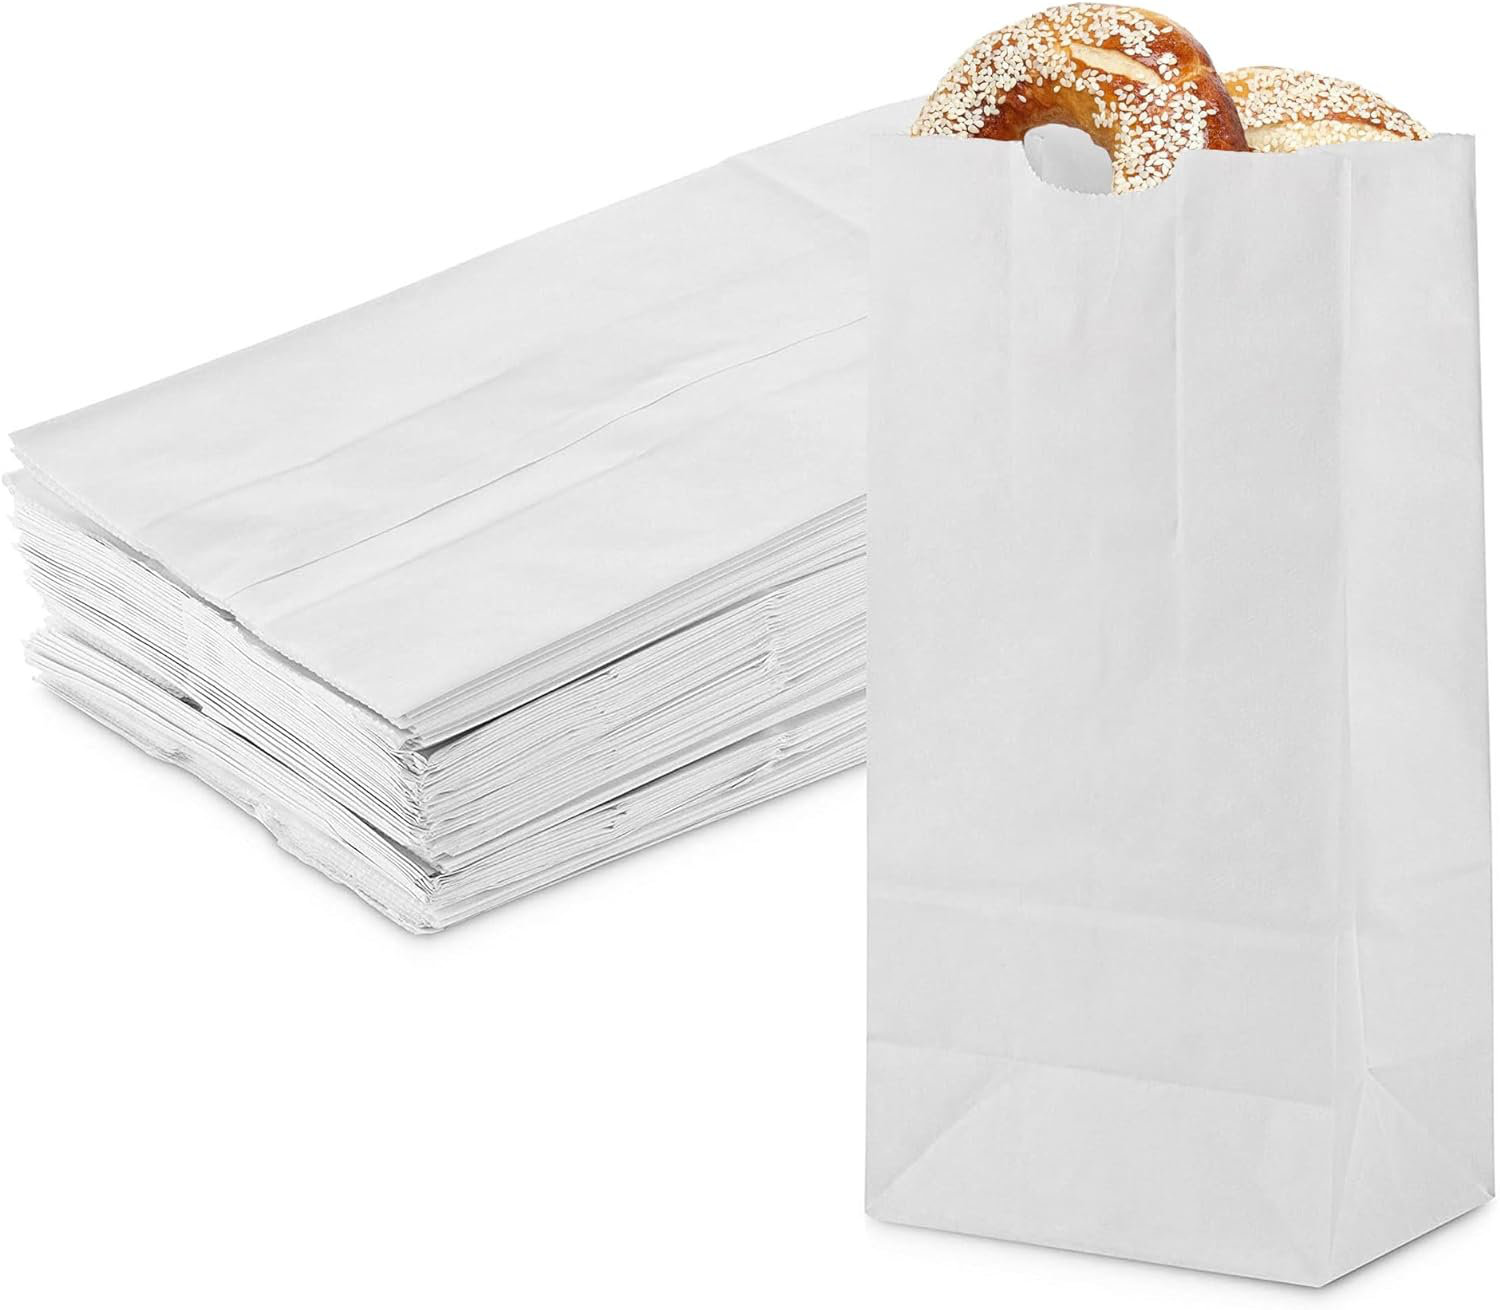 Paper Lunch Bags 100 Count Large White Lunch Bags White Paper Bags 8LB  White Lunch Sacks Strong for Small Business